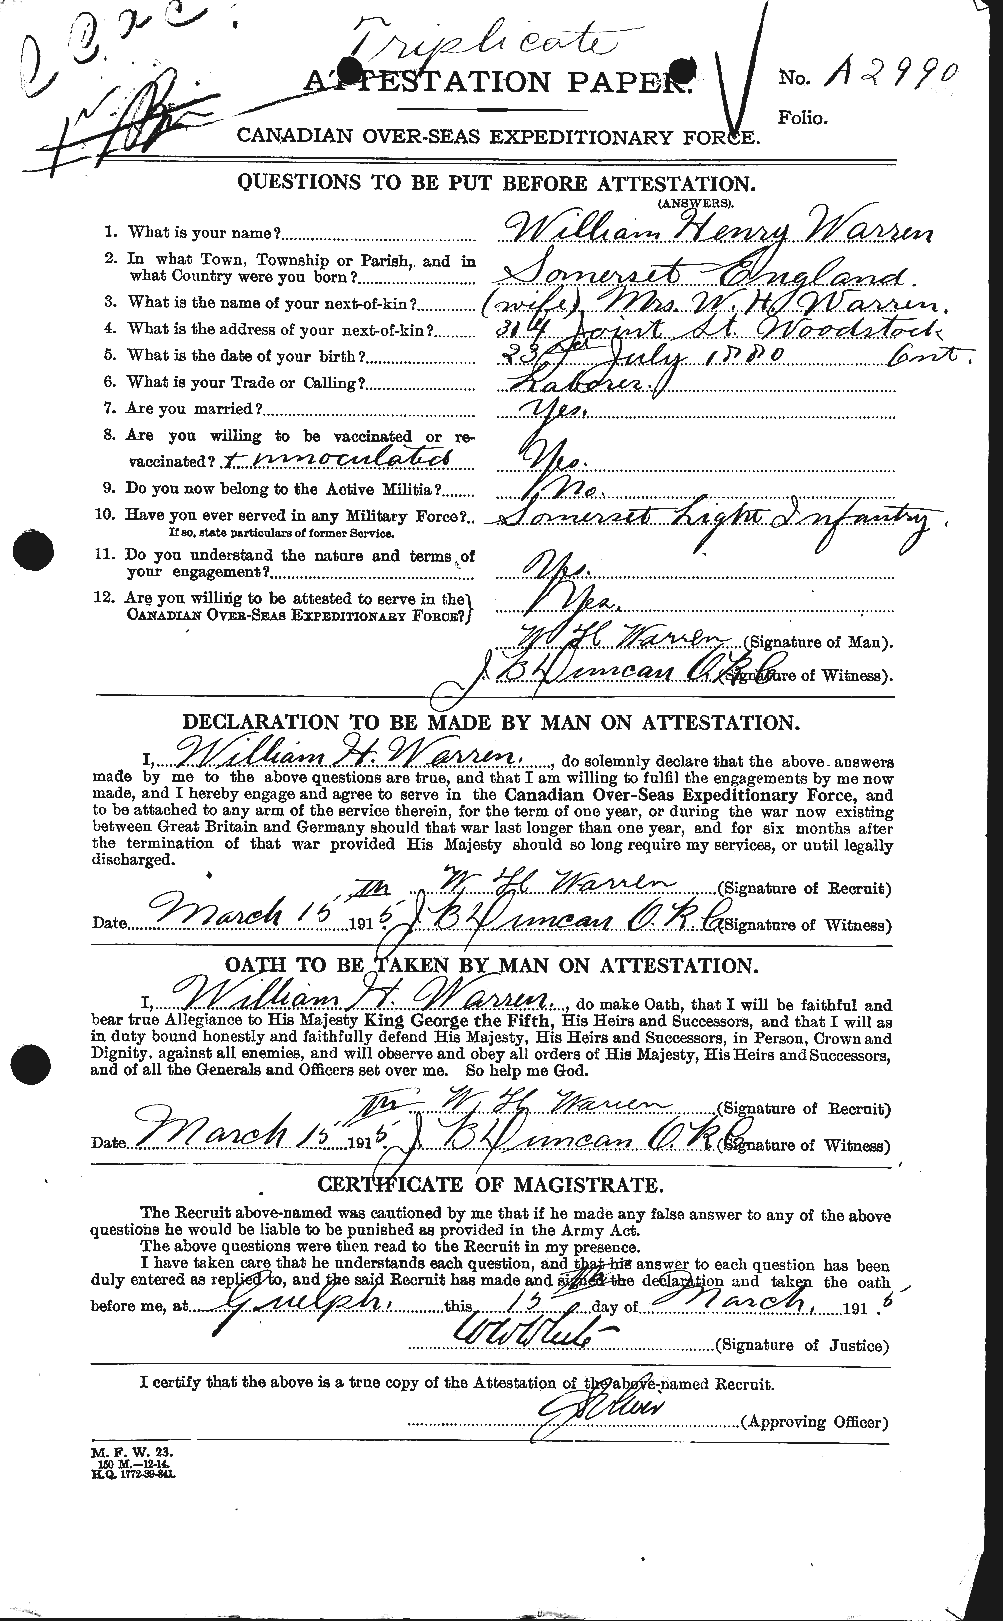 Personnel Records of the First World War - CEF 658689a